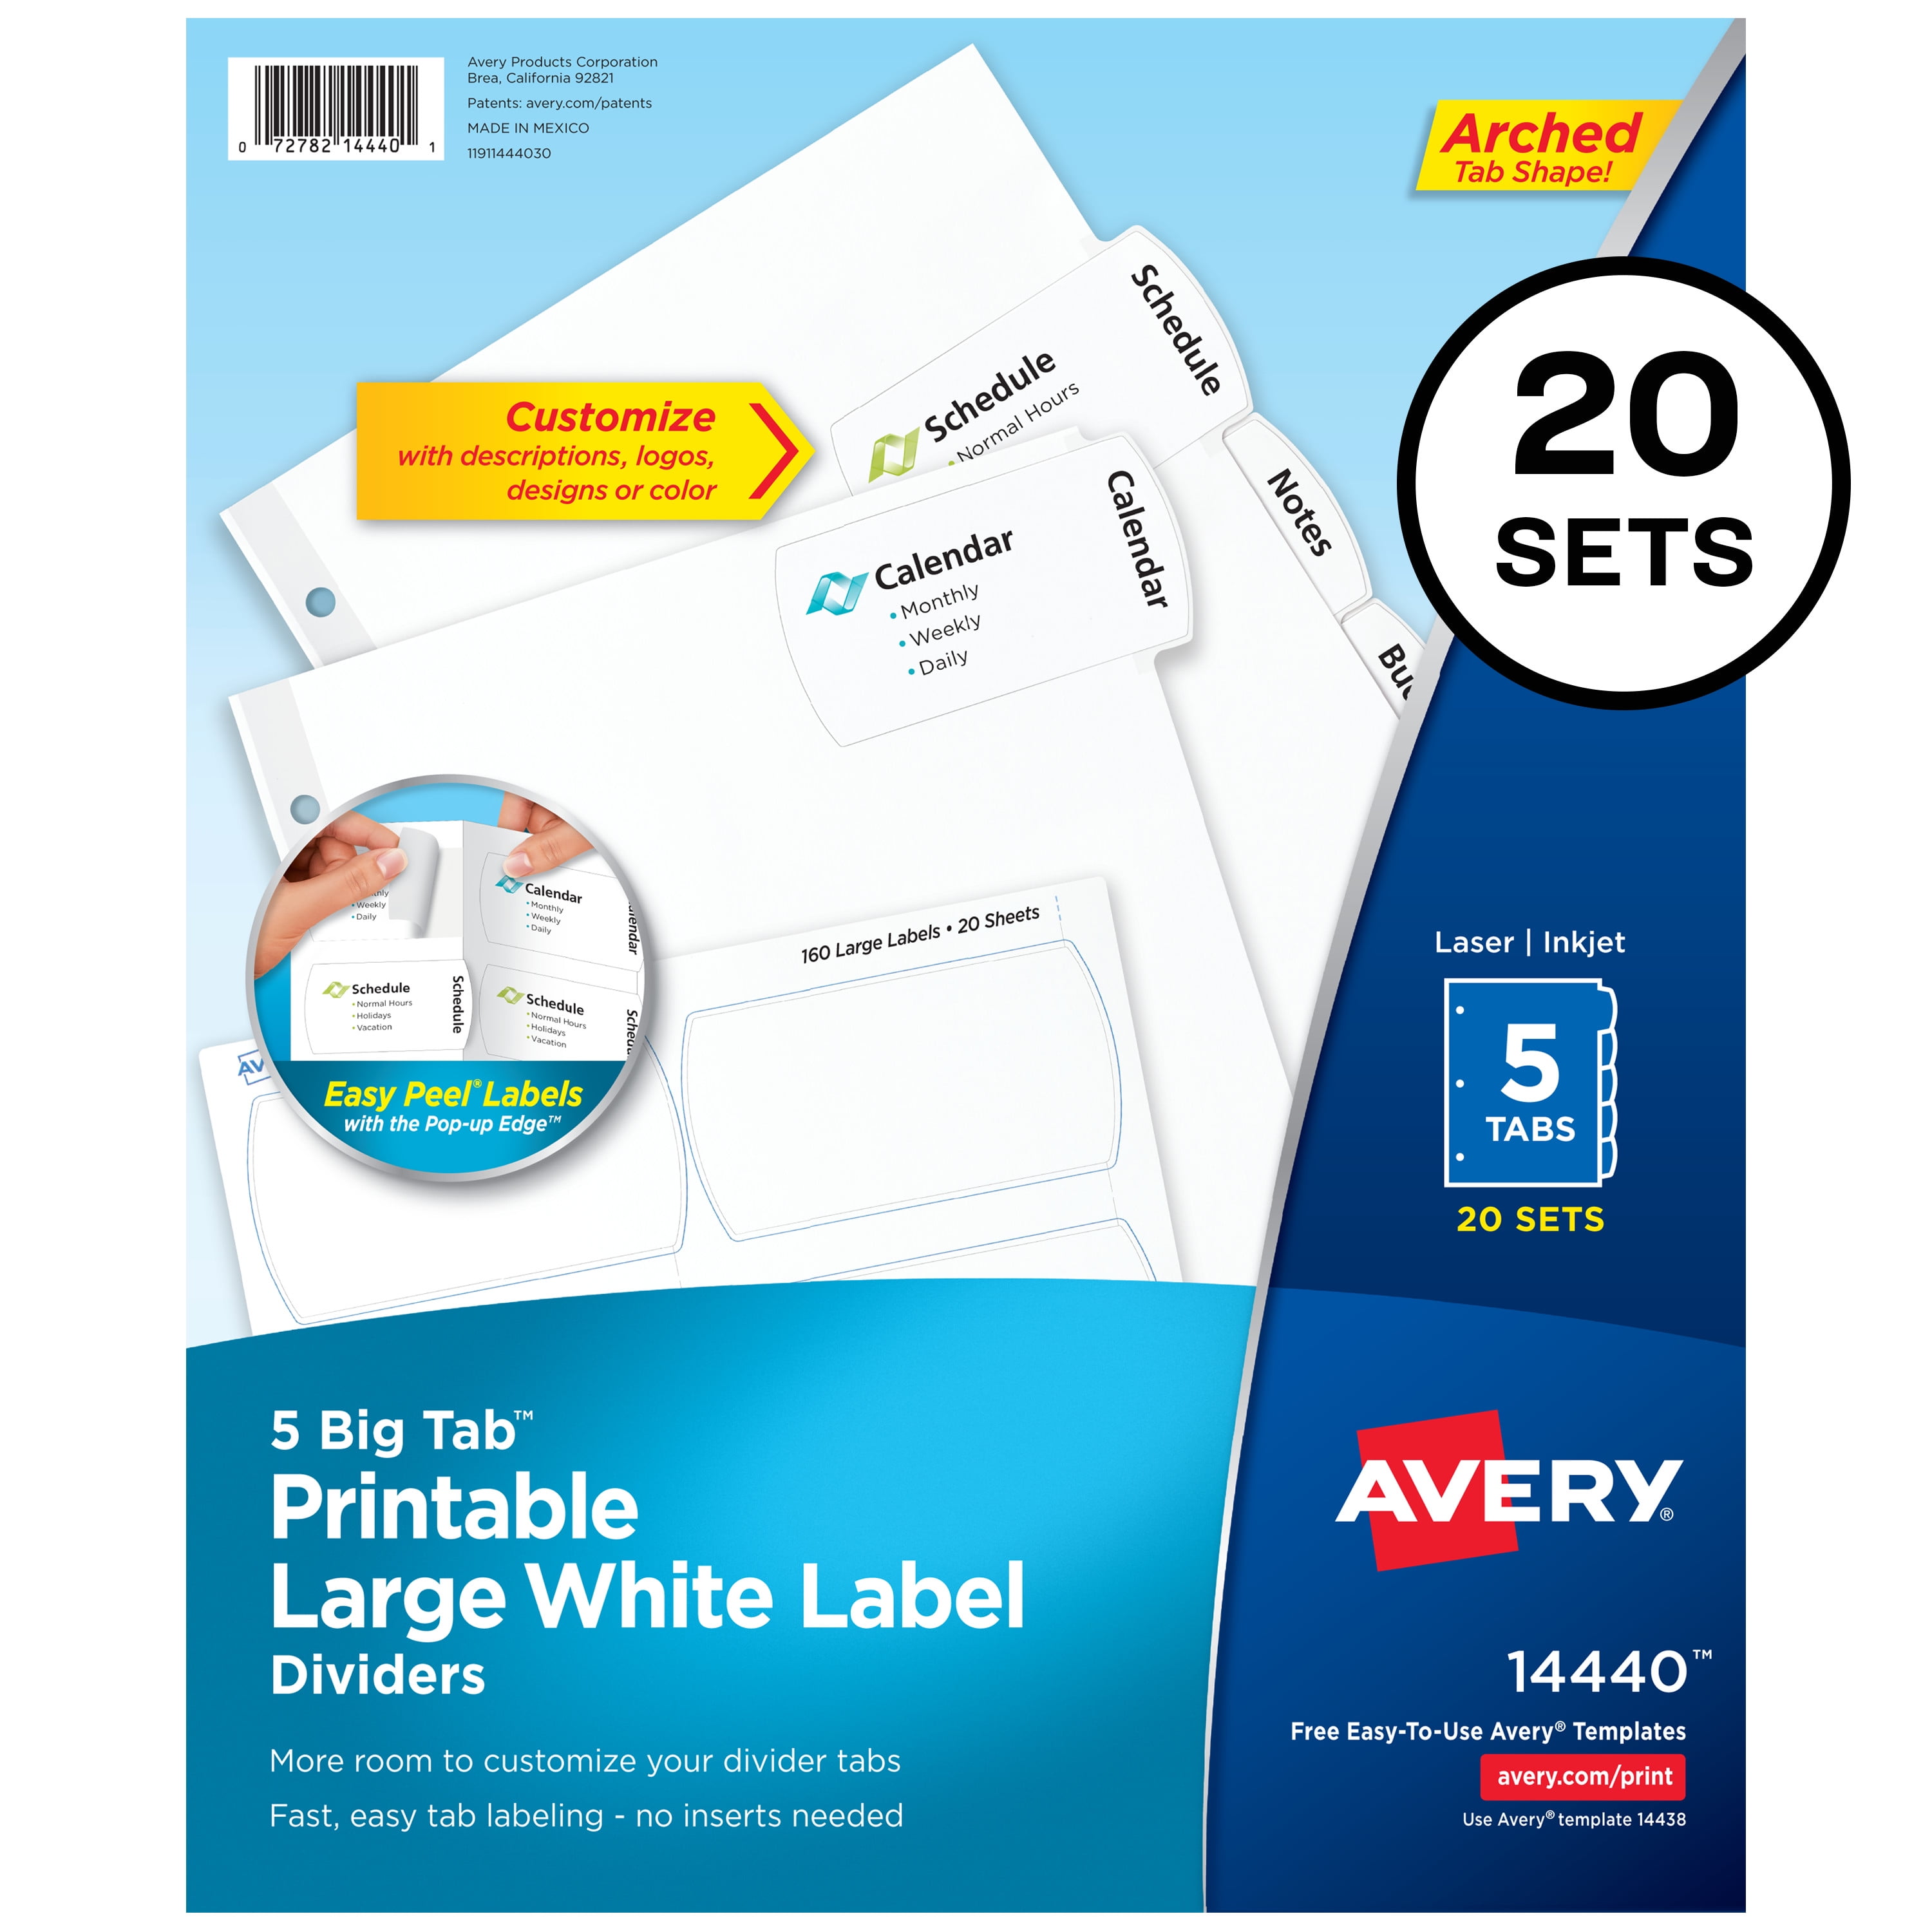 avery-big-tab-printable-large-white-label-dividers-with-easy-peel-5